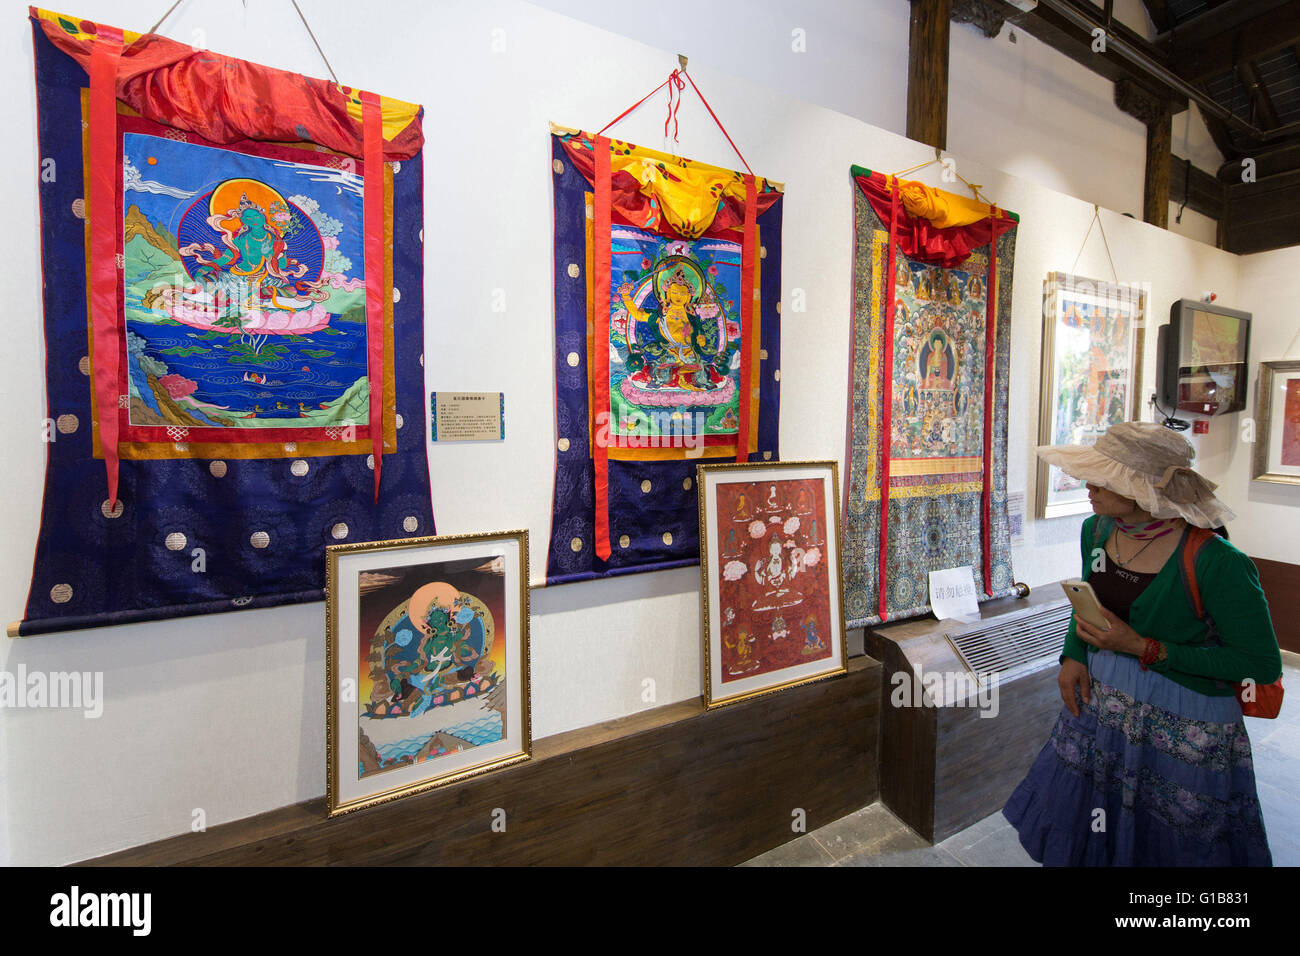 Nanjing, Nanjing, CHN. 12th May, 2016. Nanjing, China - May 12 2016: (EDITORIAL USE ONLY. CHINA OUT ) Thangka Exhibition from Gongka County Mozhu Yibet in Nanjing's Yu Garden. A thangka, variously spelt as tangka, thanka or tanka (Nepali pronunciation: [?t??a?ka]; Tibetan: ?????; Nepal Bhasa: ????) is a Tibetan Buddhist painting on cotton, or silk appliquÂ¨Â¦, usually depicting a Buddhist deity, scene, or mandala. Thangkas are traditionally kept unframed and rolled up when not on display, mounted on a textile backing somewhat in the style of Chinese scroll paintings, with a further silk cover Stock Photo